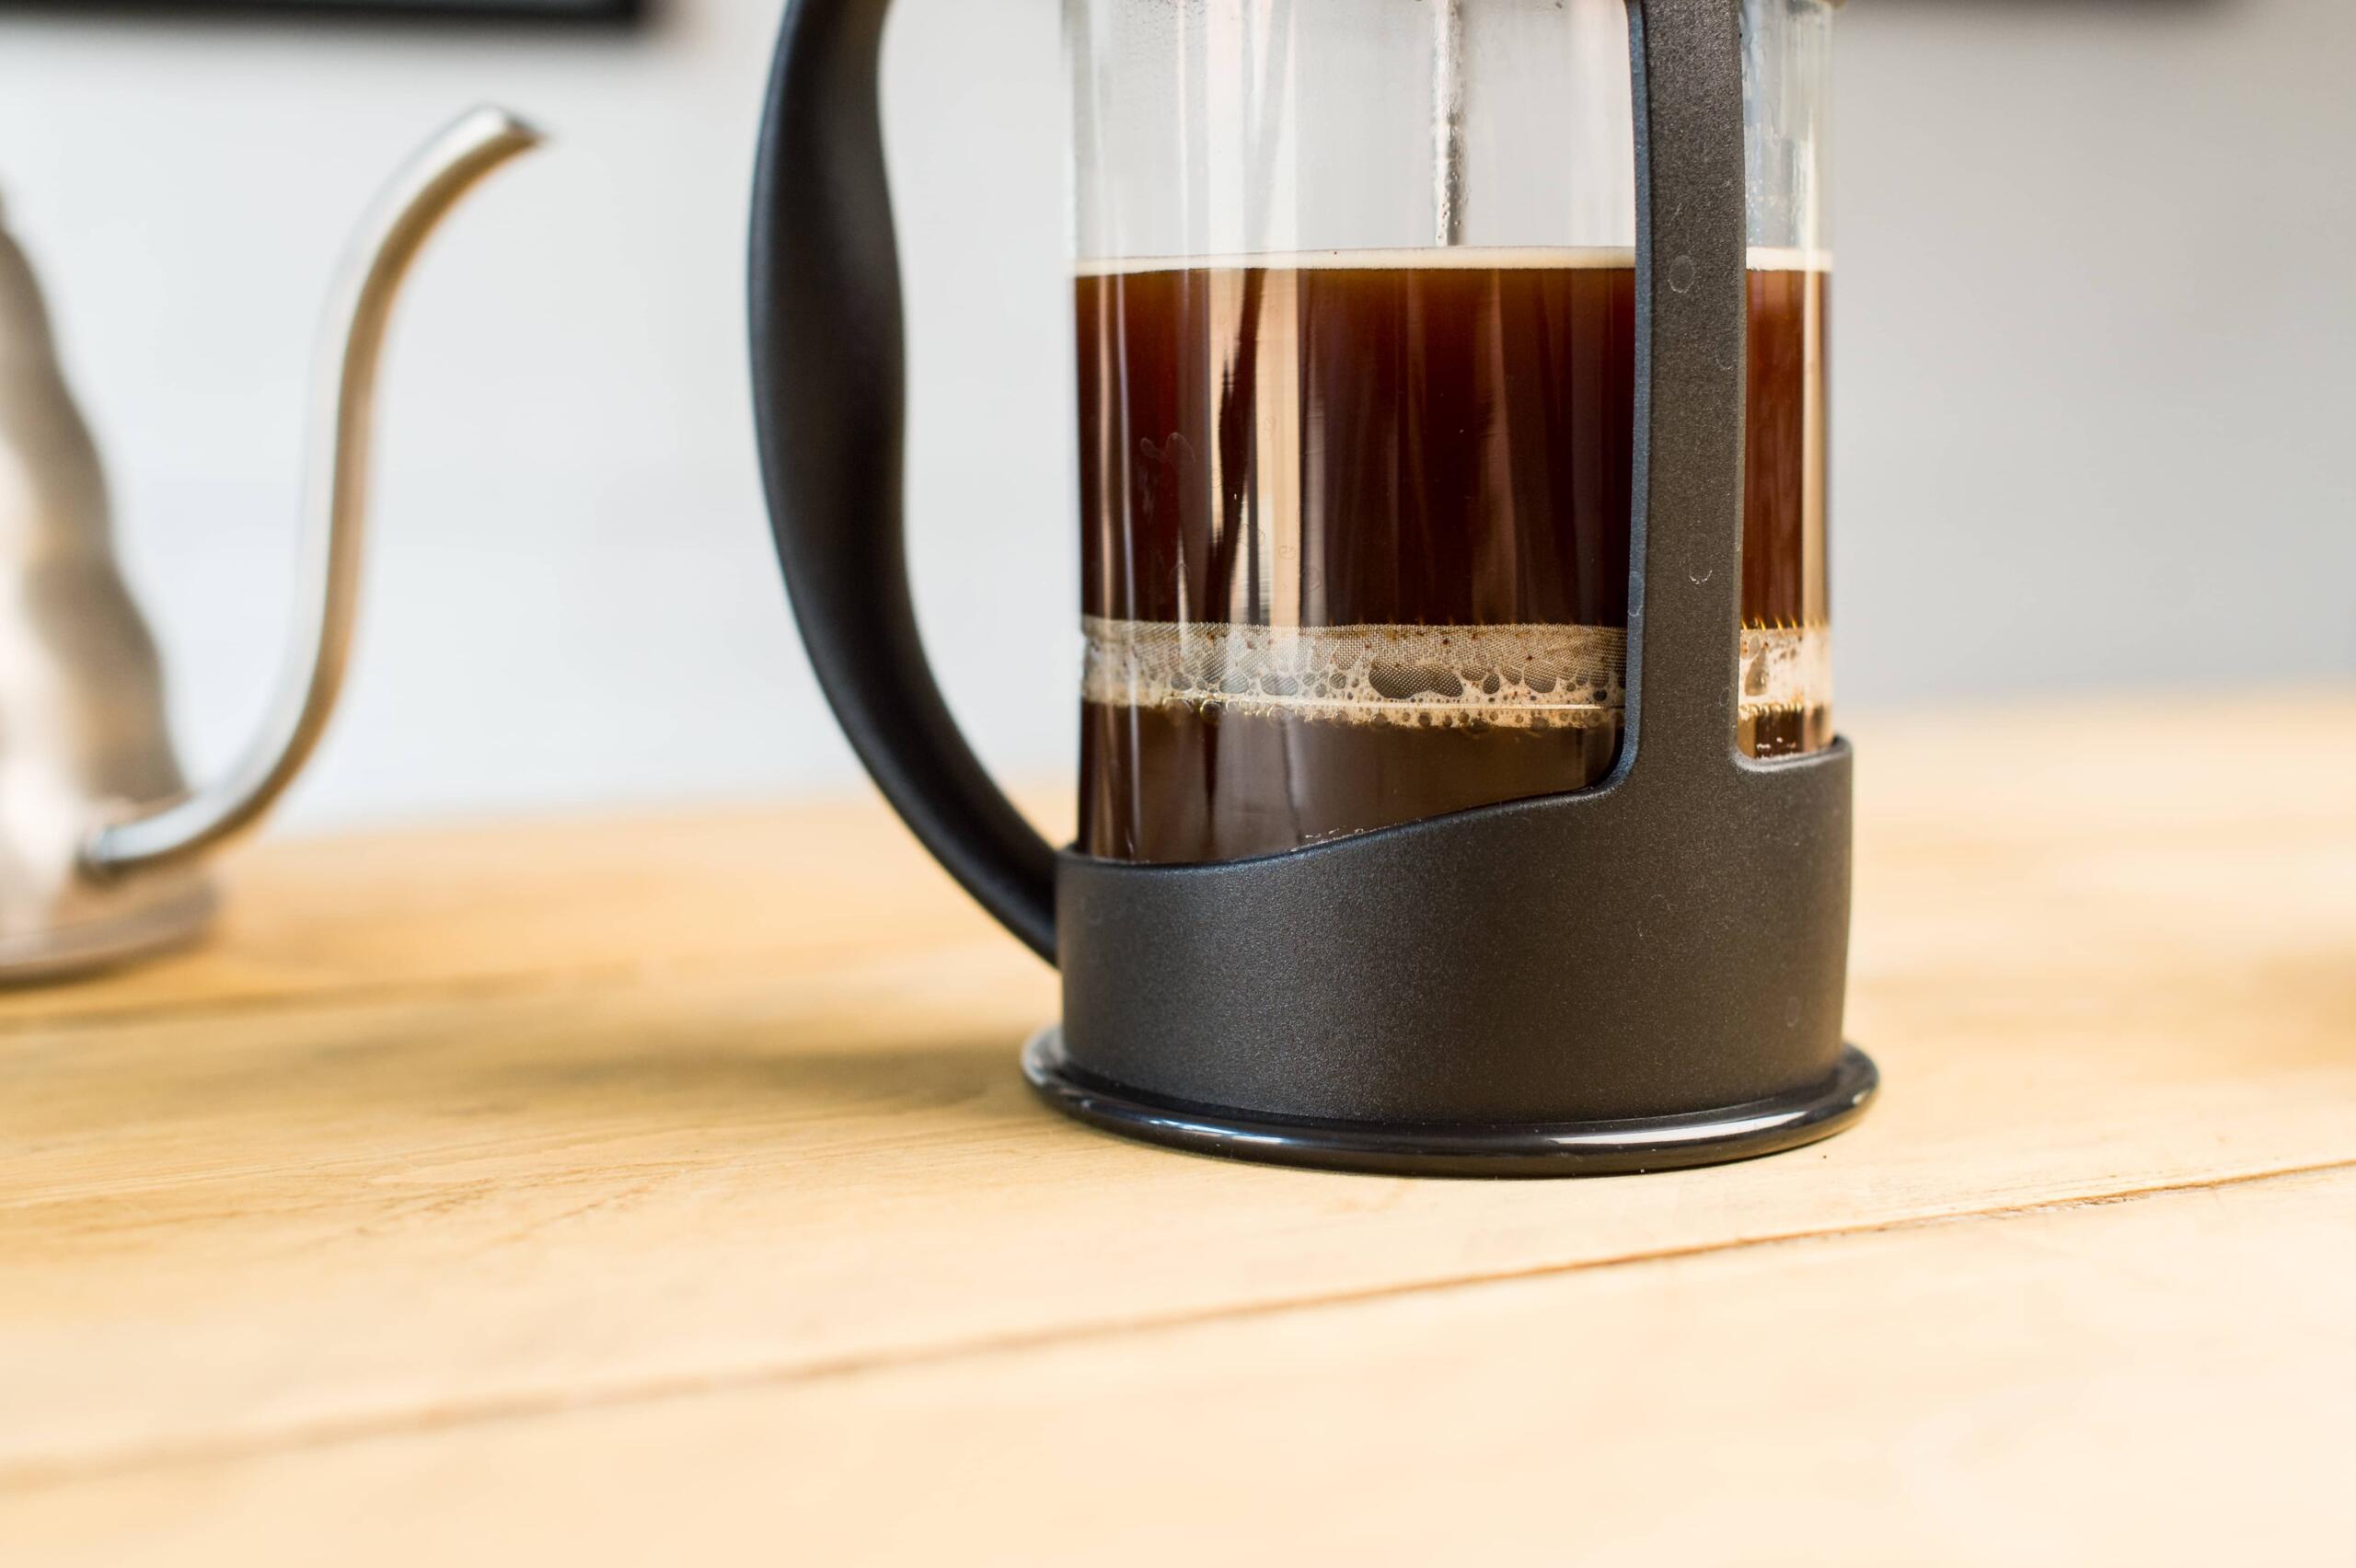 A Cafetiere being plunged